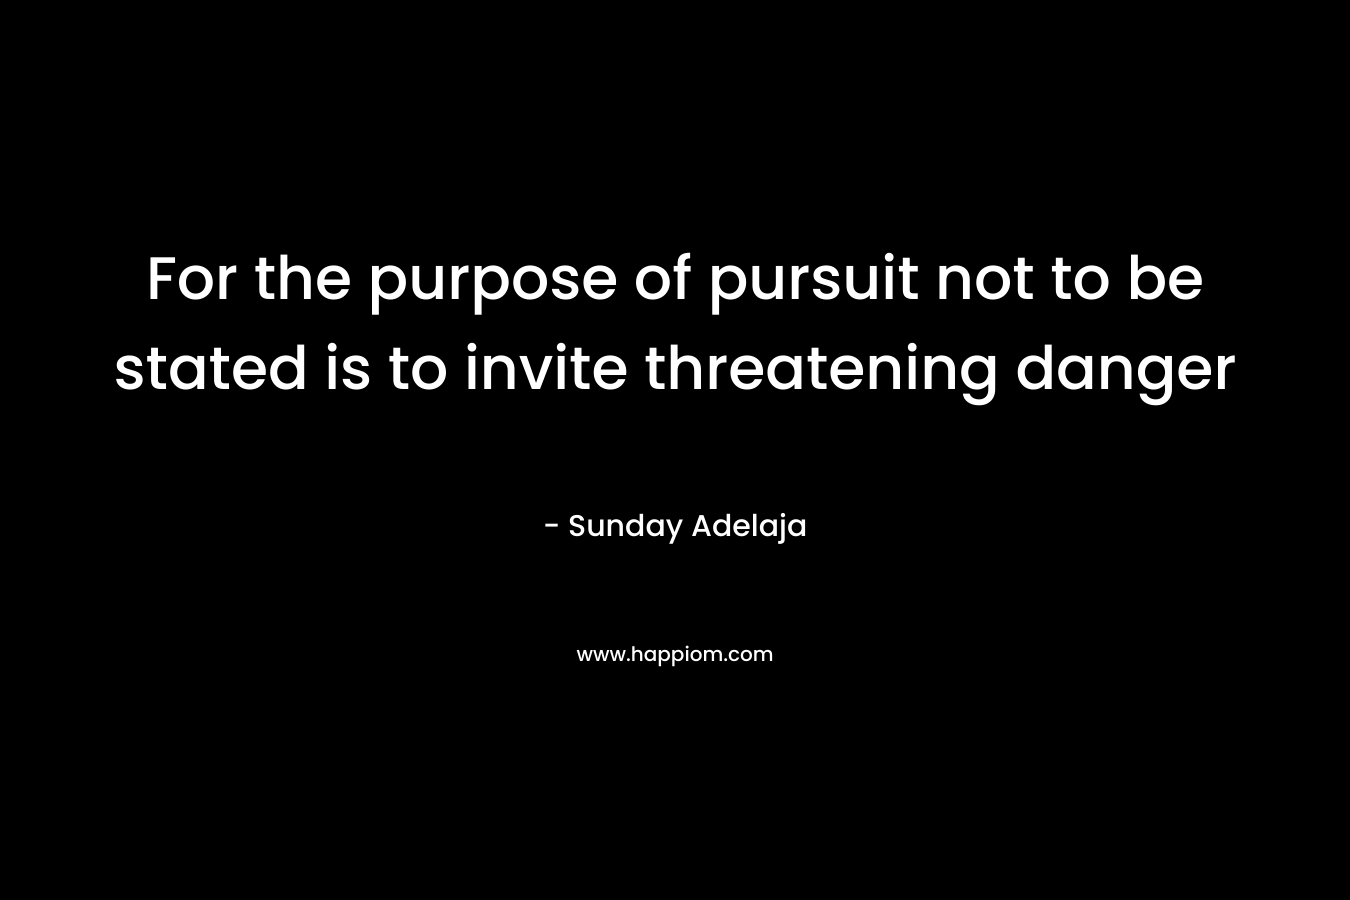 For the purpose of pursuit not to be stated is to invite threatening danger